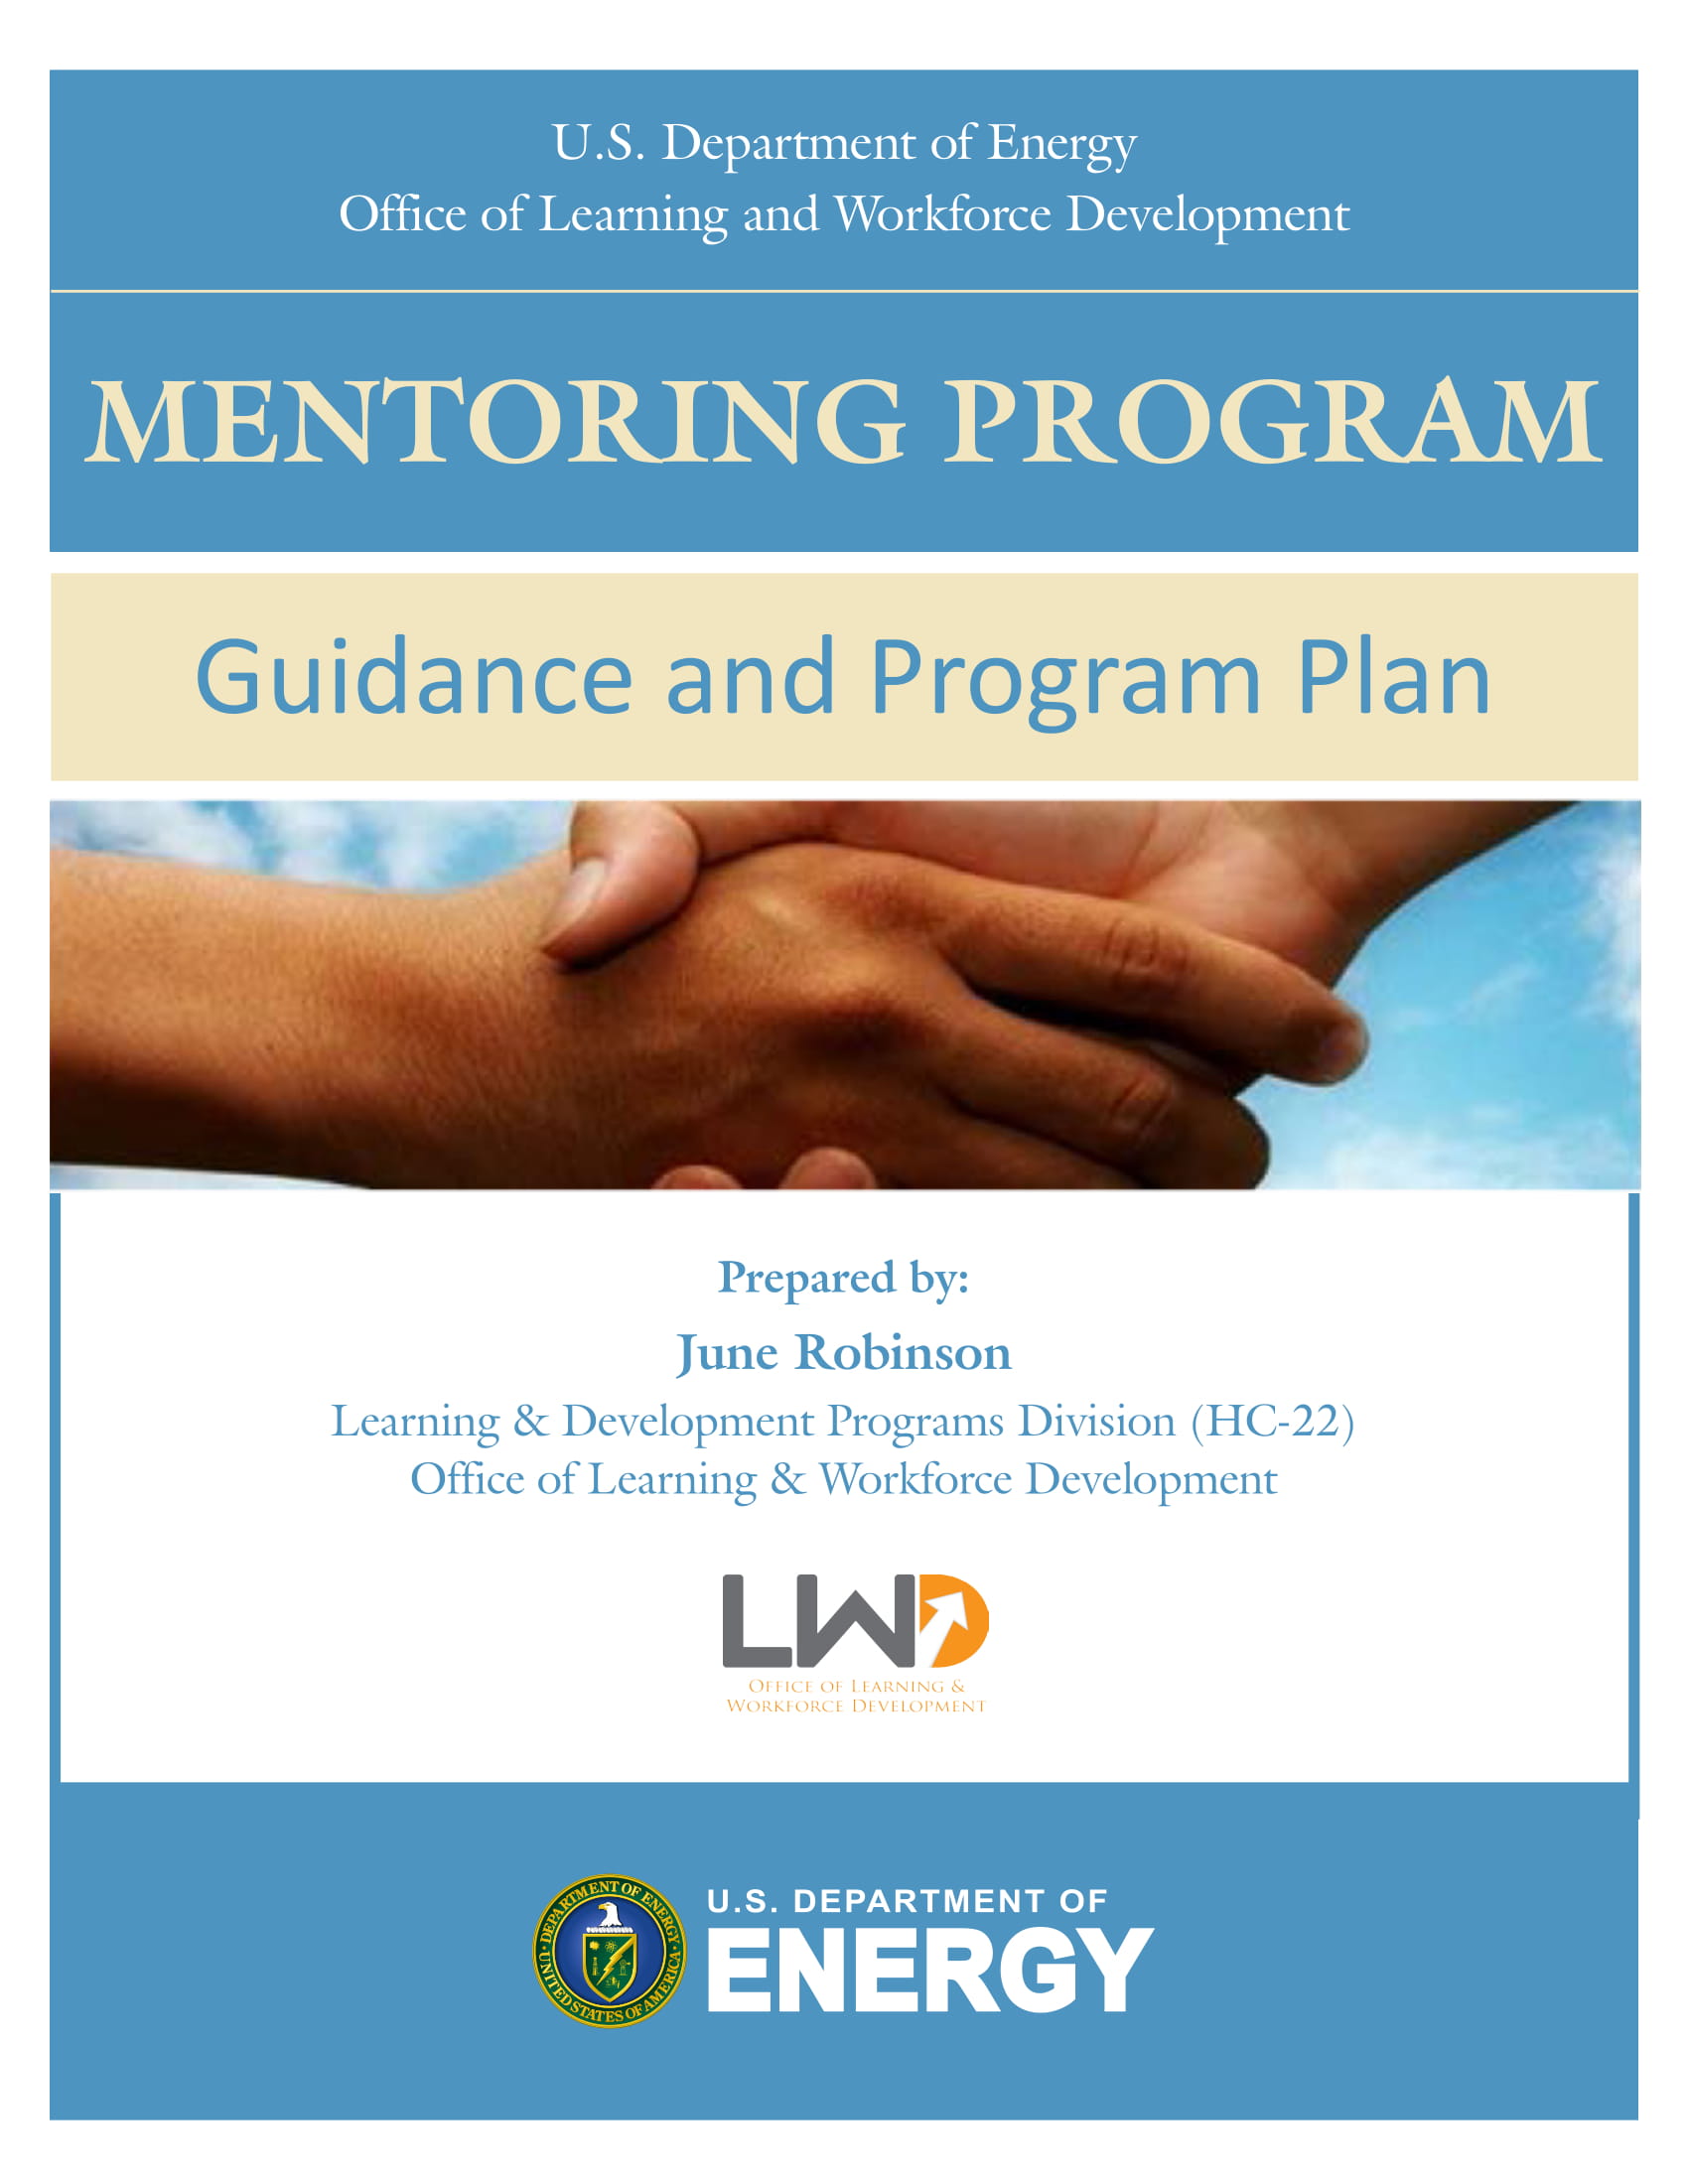 mentoring program guidance and program action plan example 01